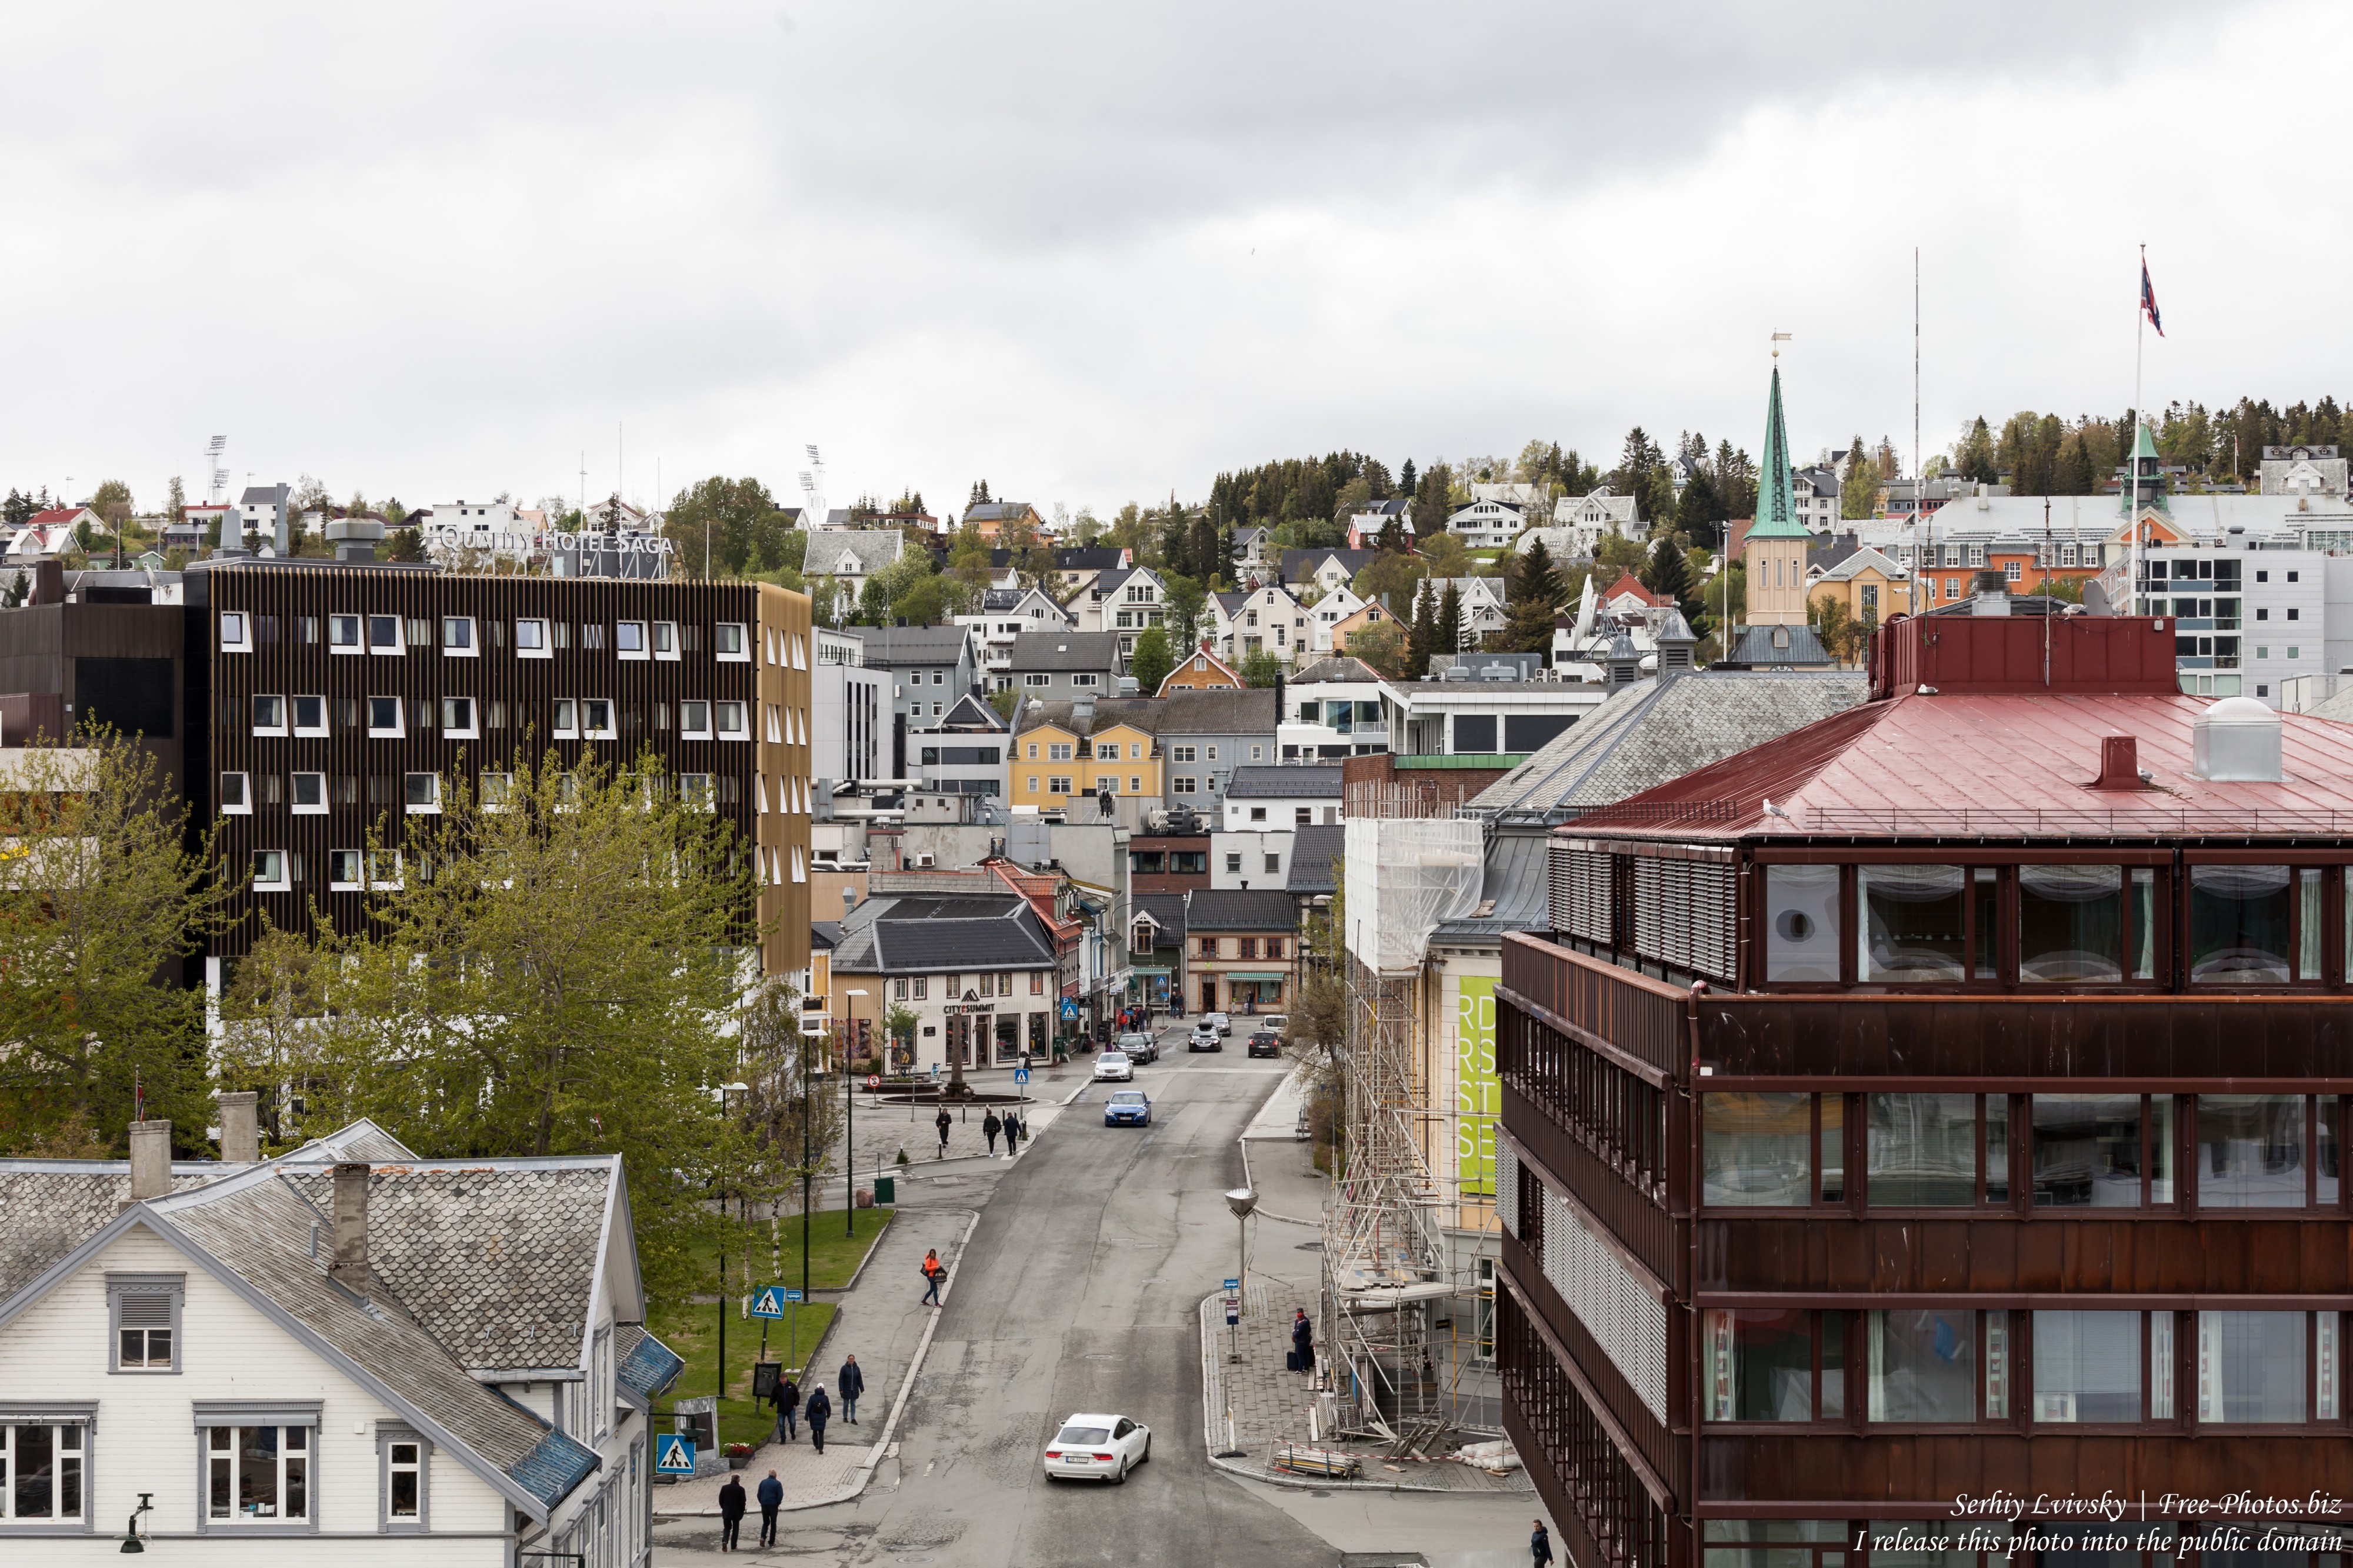 Tromso, Norway, photographed in June 2018 by Serhiy Lvivsky, picture 37